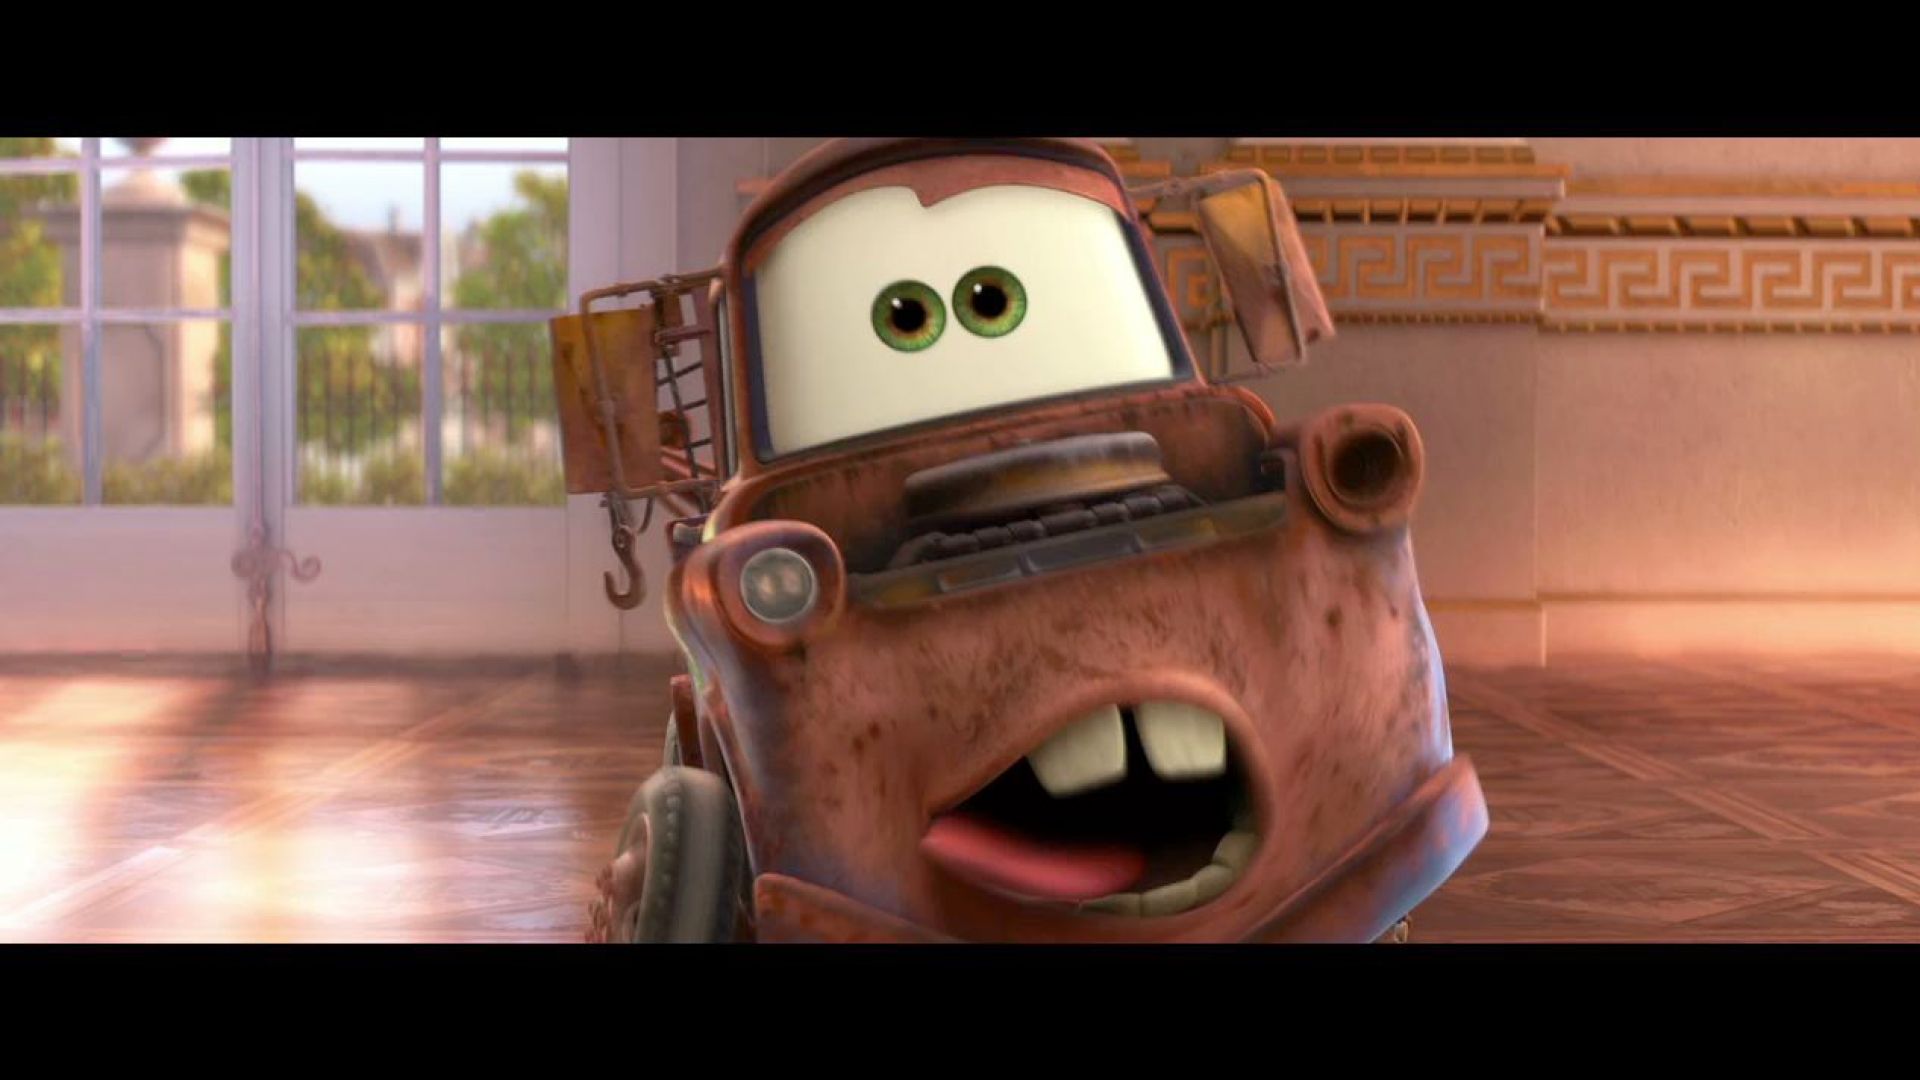 Lightning McQueen must be stopped, Cars 2